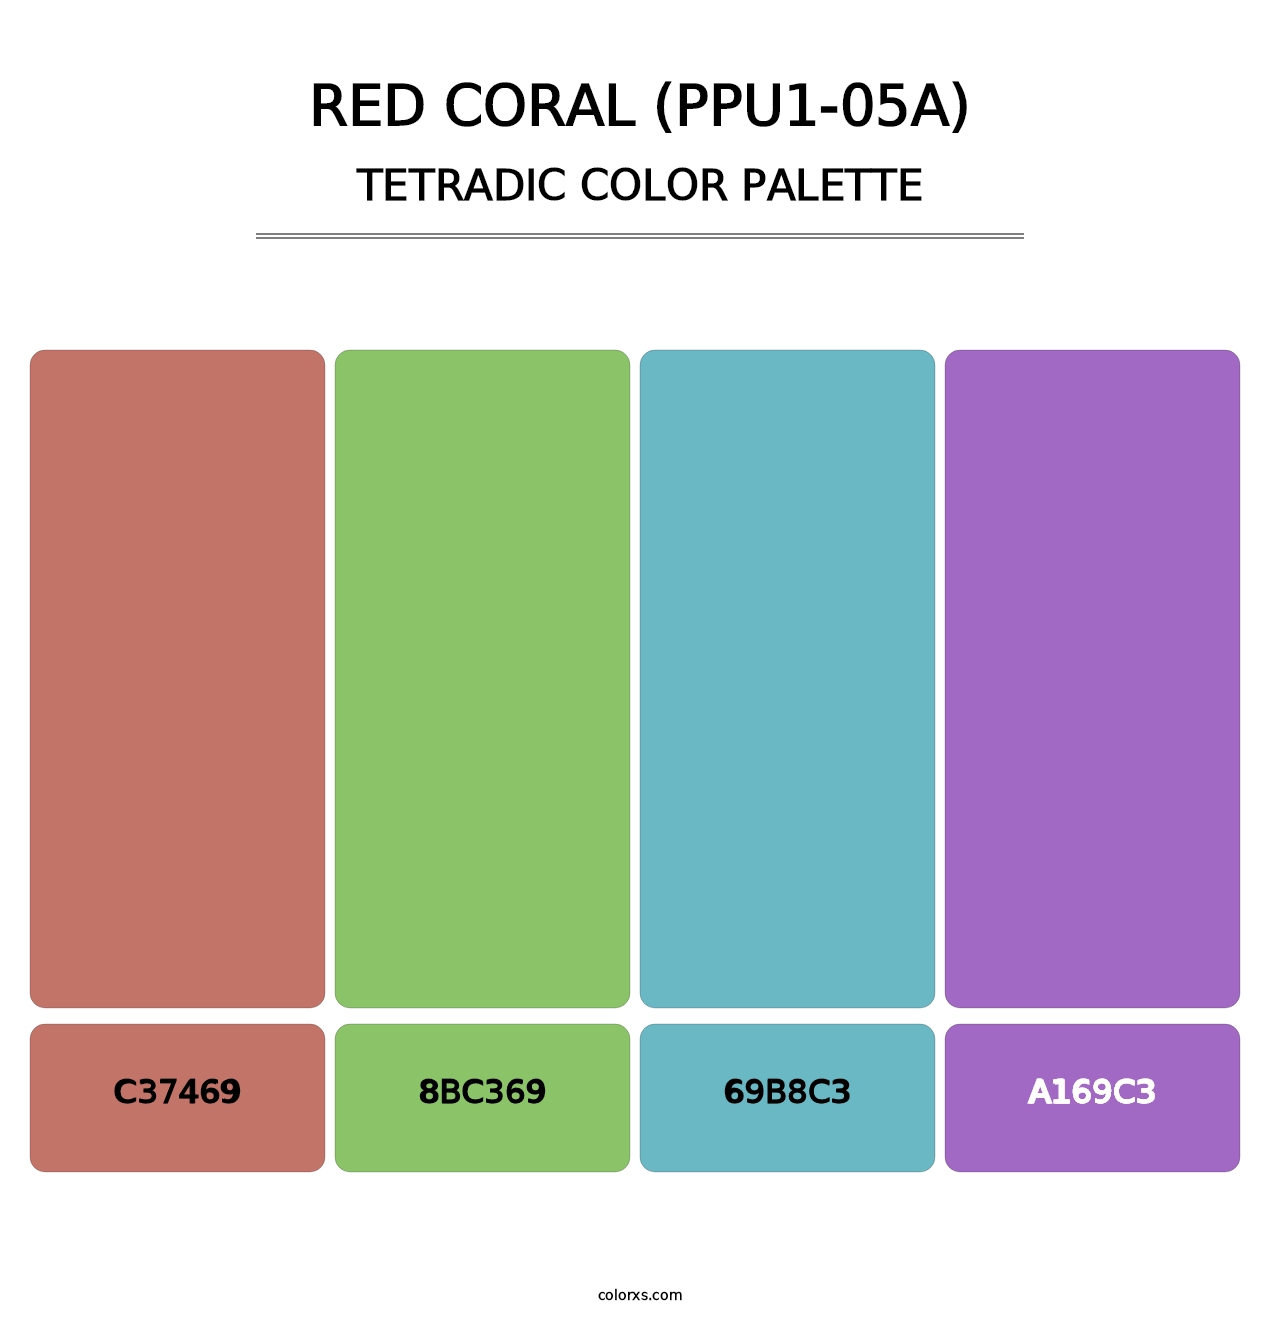 Red Coral (PPU1-05A) - Tetradic Color Palette